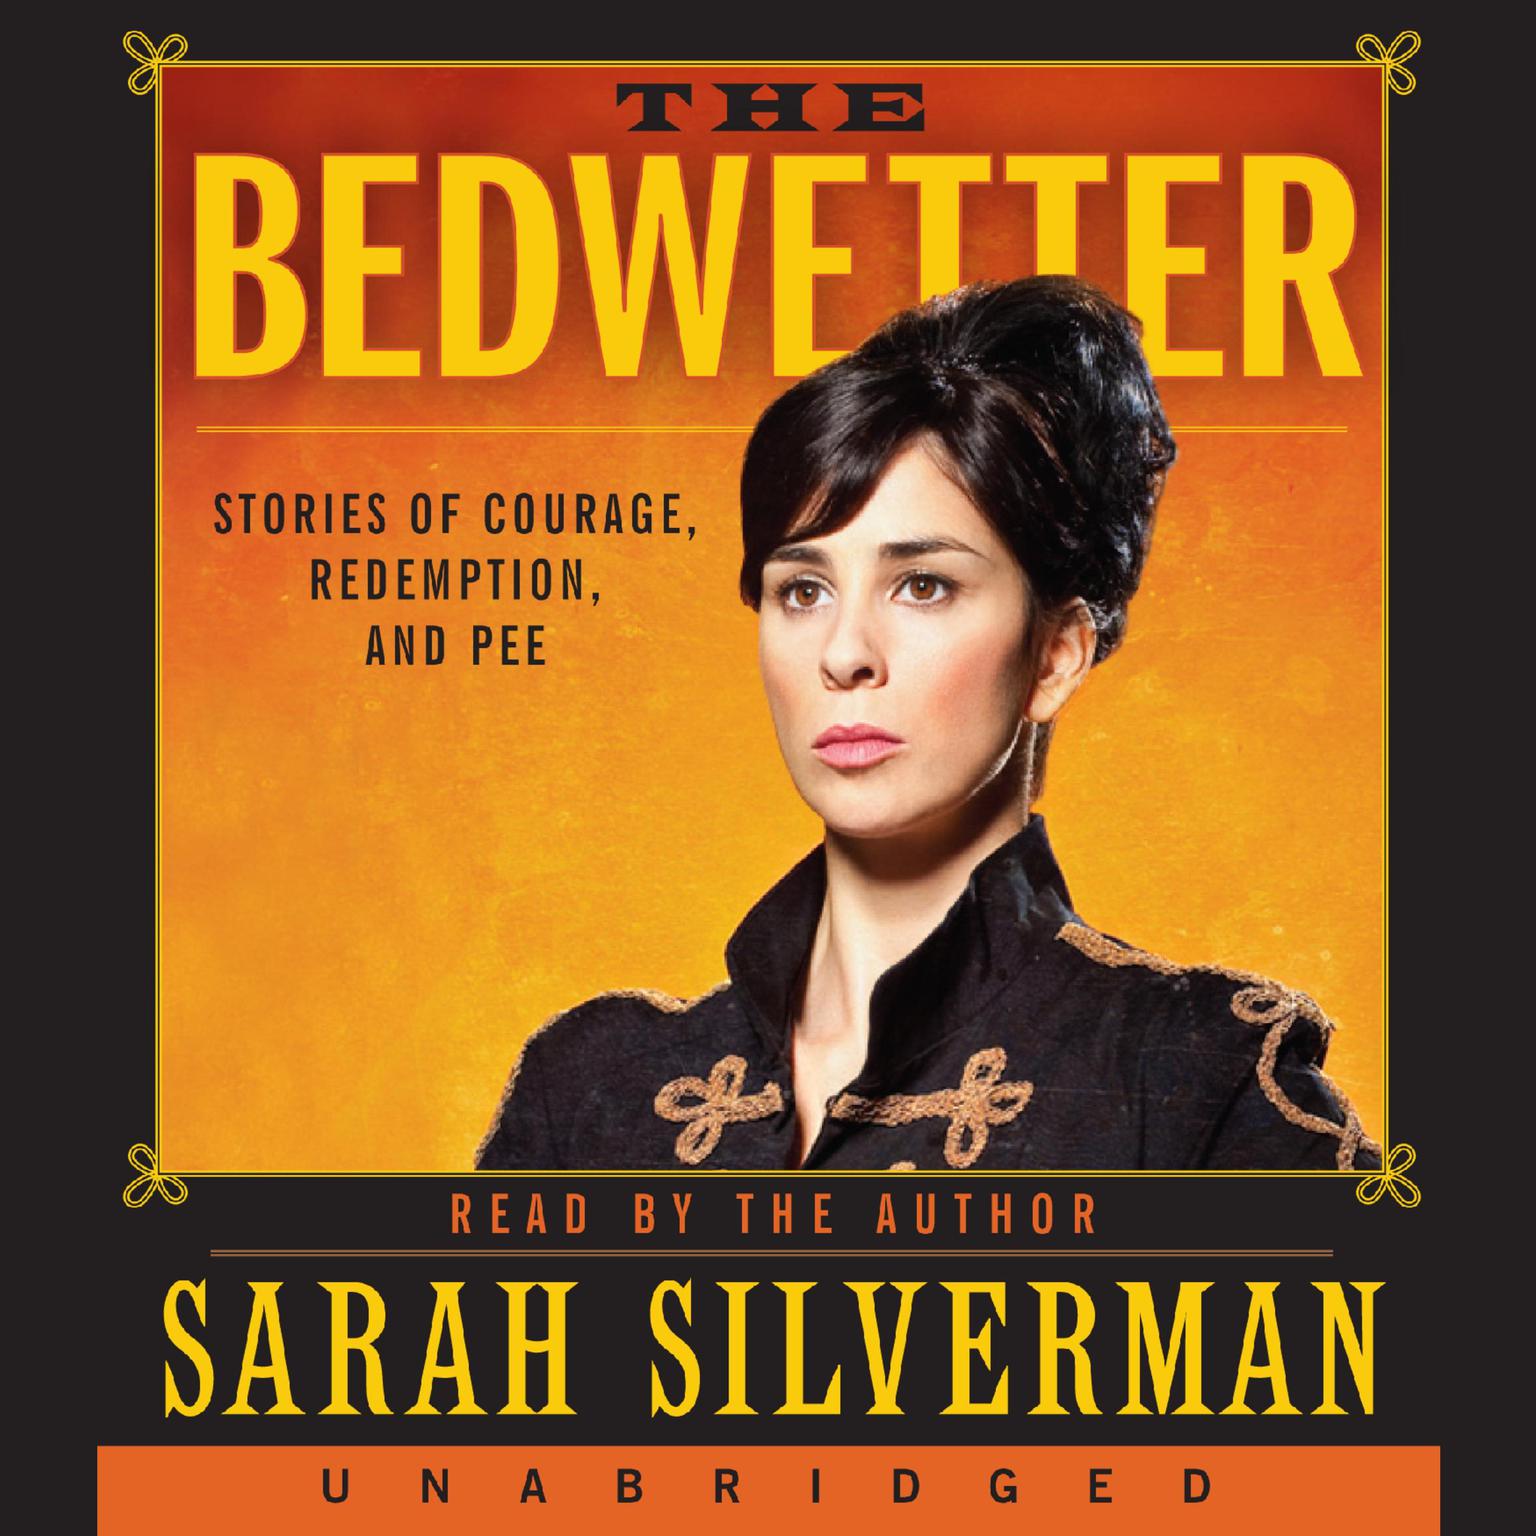 The Bedwetter: Stories of Courage, Redemption, and Pee Audiobook, by Sarah Silverman